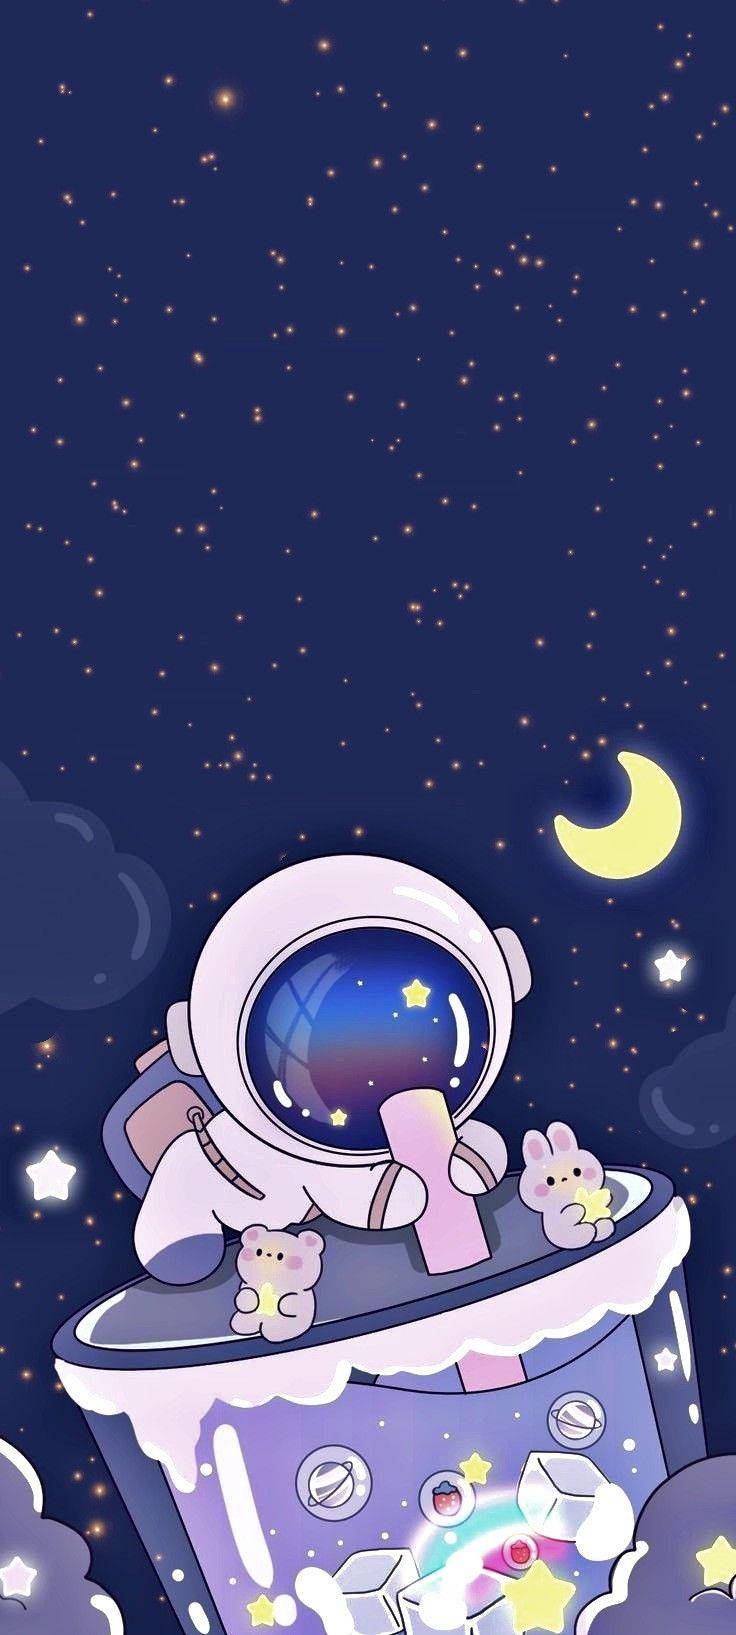 Cartoon Astronaut Sipping From Large Cup Background